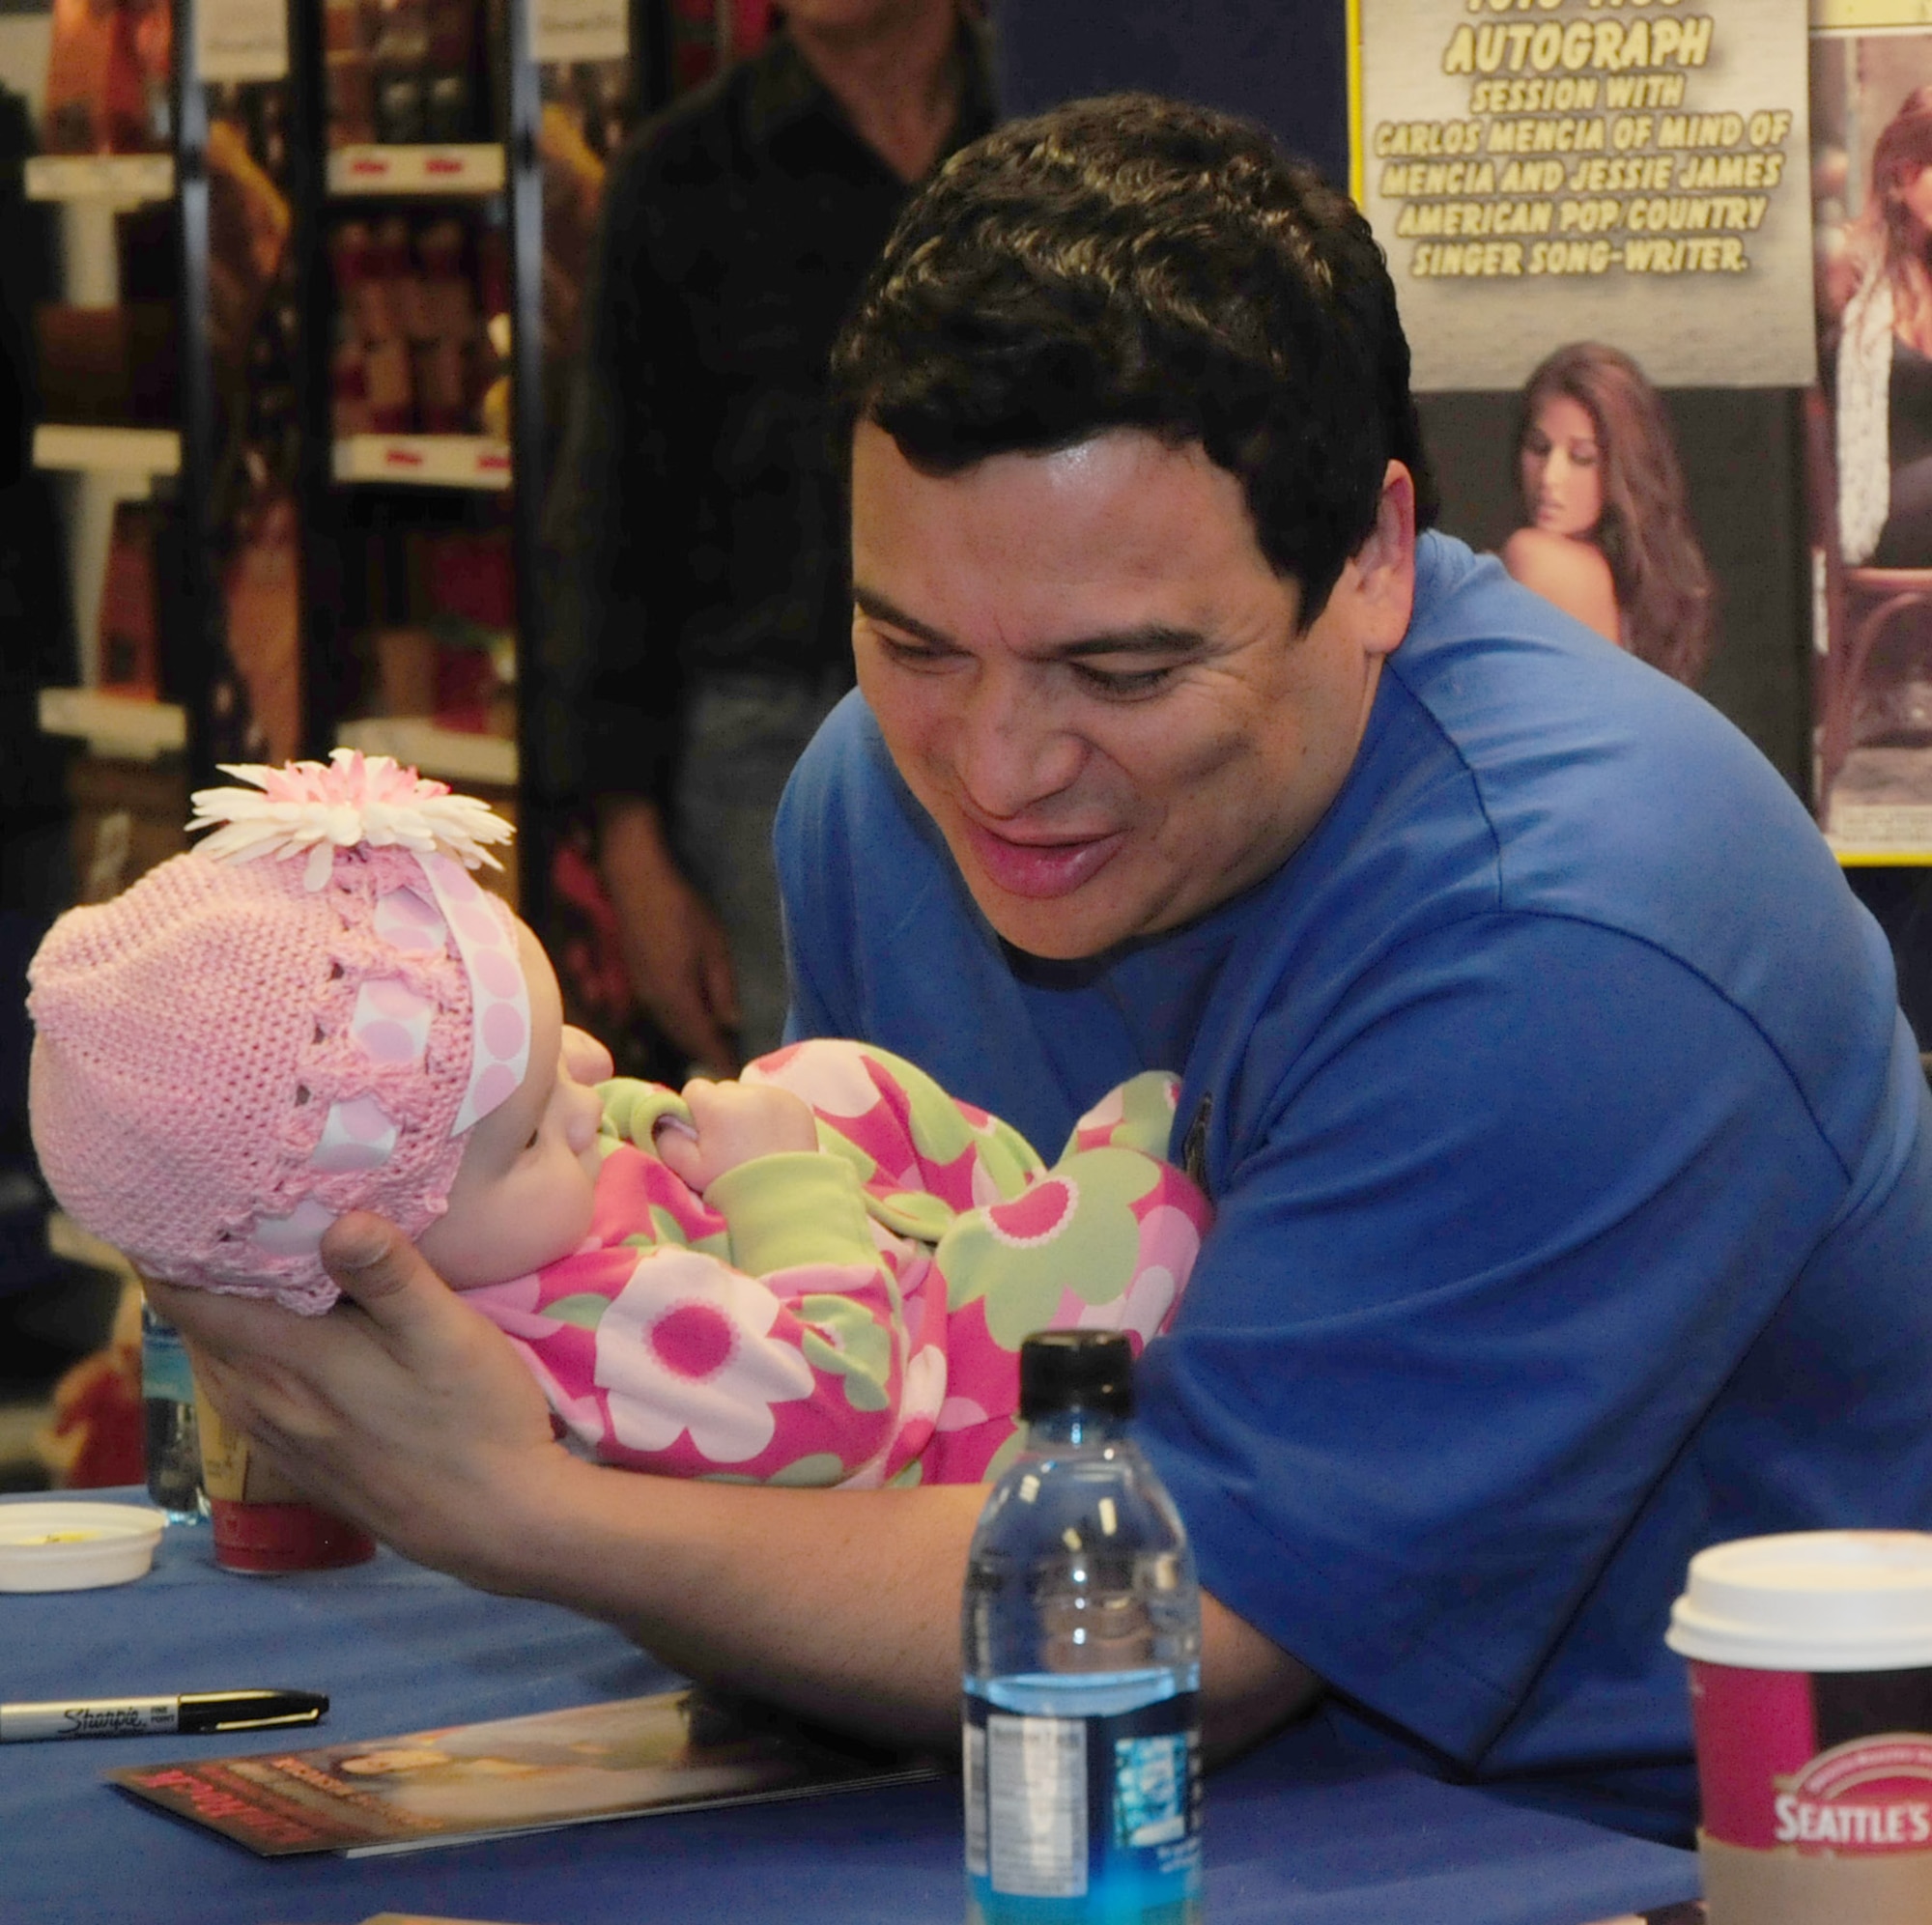 Comedian Carlos Mencia takes a break from signing autographs at the RAF Lakenheath Base Exchange to hold Carys Wigginton, 5 months, daughter of Tech. Sgt. Michael Wigginton, 48th Component Maintenance Squadron, at RAF Lakenheath, England, Dec. 11.  Mr. Mencia entertained military families in Hangar 7 at RAF Lakenheath, England during the Tour for the Troops 2009 concert.  The comedian was joined by singers Kid Rock and Jessie James as they toured various bases in Europe and Southwest Asia to show their support and appreciation for the military.  (U.S. Air Force photo by Staff Sgt. Connor Estes)